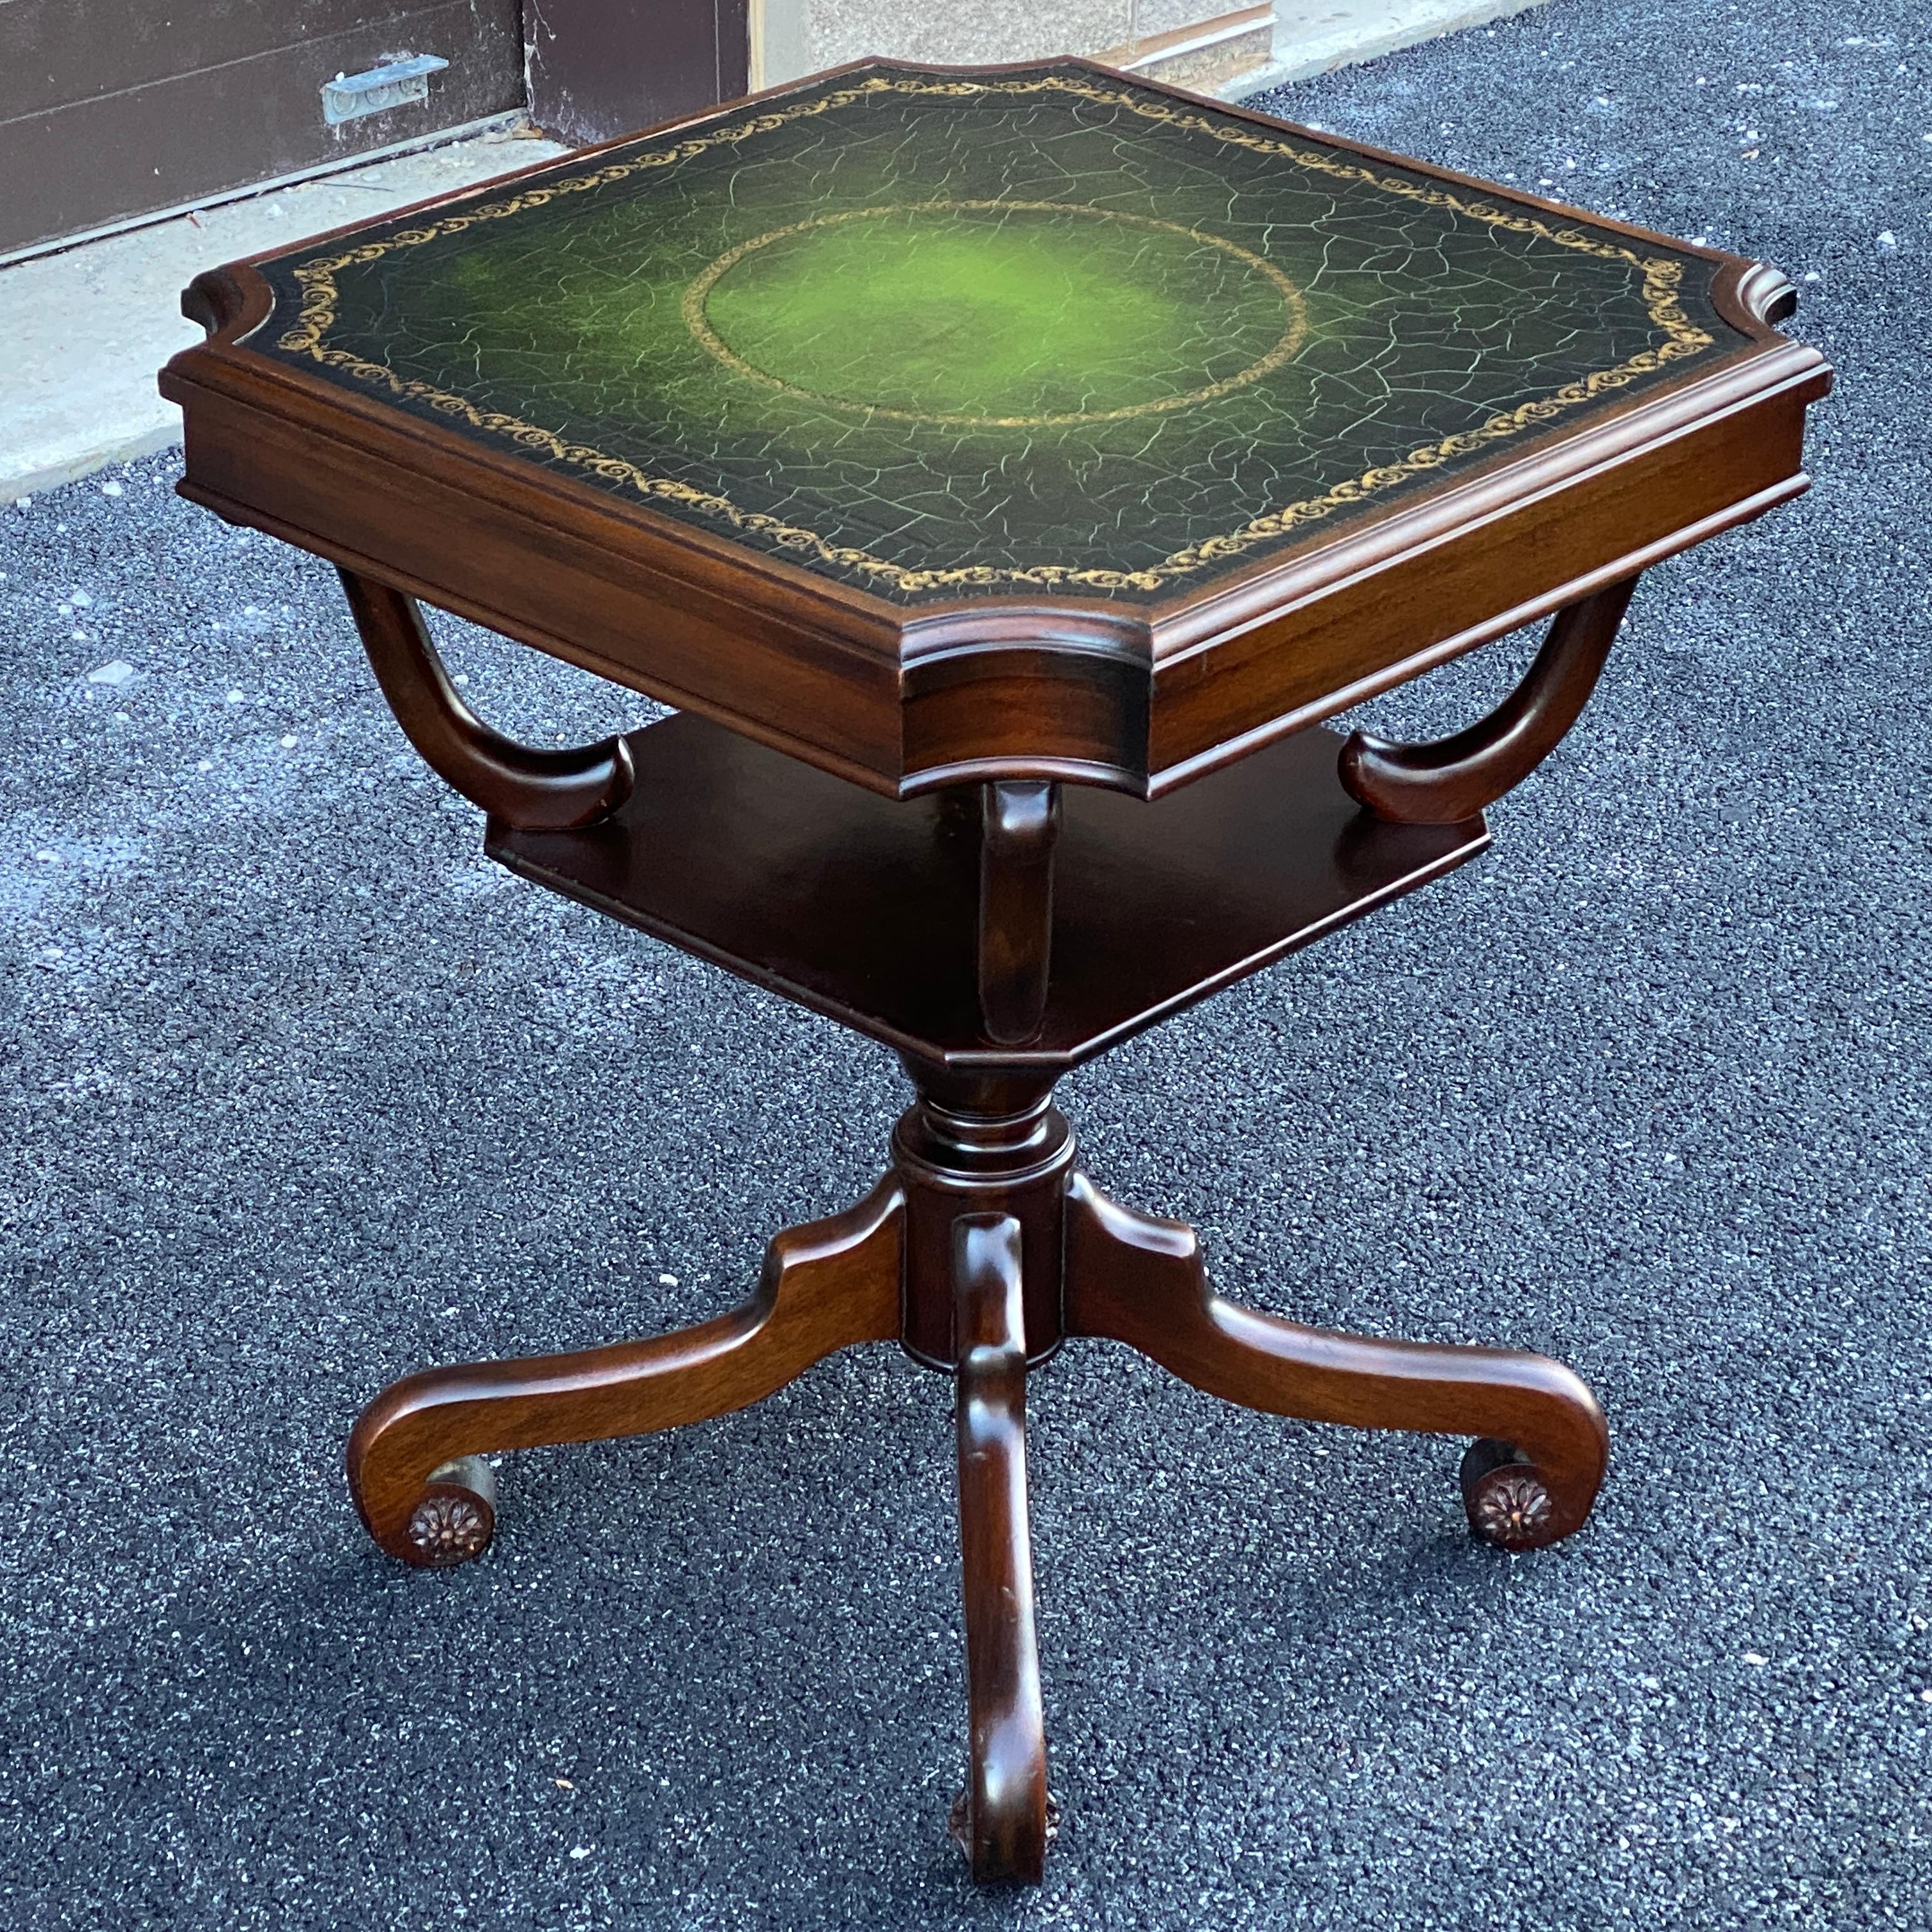 Regency Mahogany Scroll Foot Center Table With Tooled Green Leather Top For Sale 13